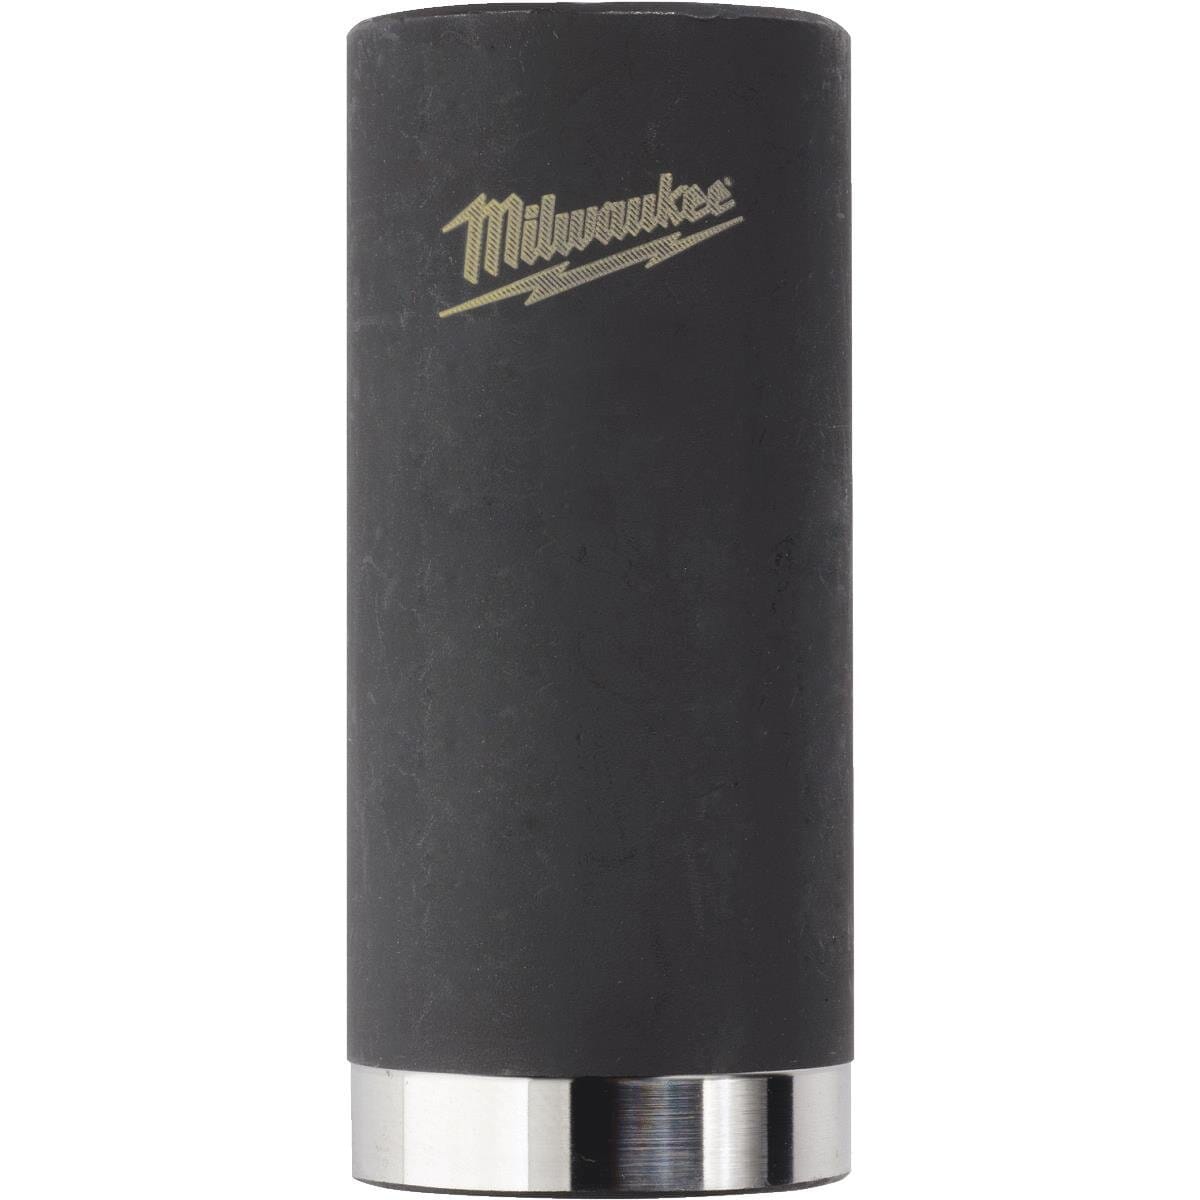 Milwaukee® SHOCKWAVE™ 49-66-4463 Deep Well Thinwall Impact Socket, 1/2 in Square Drive, 1/2 in Impact Socket, 6 Points